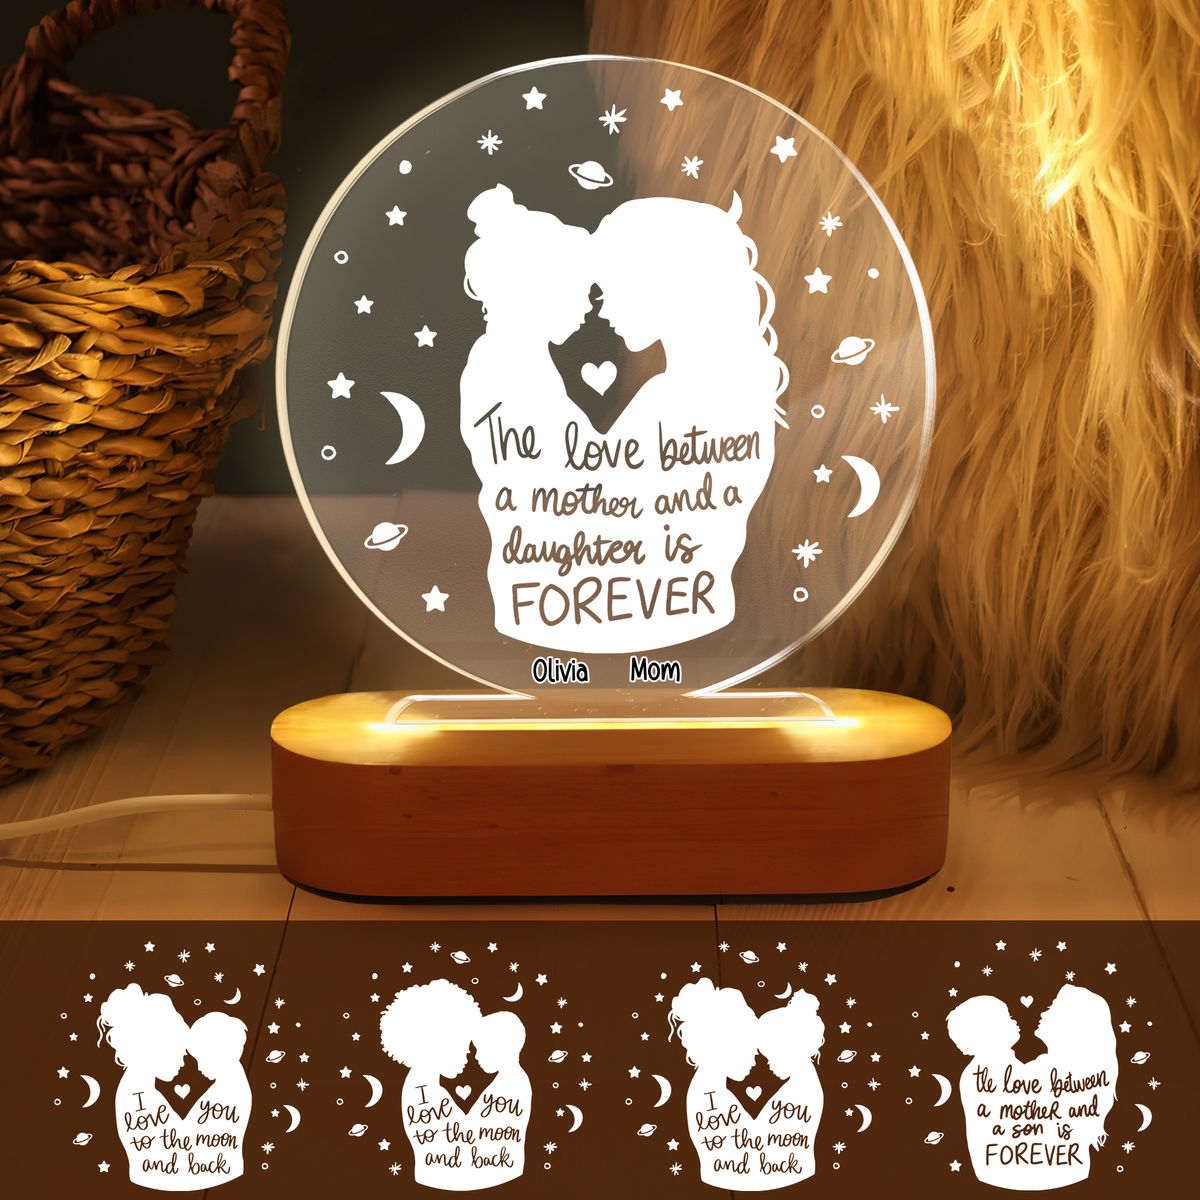 Transparent Lamp - Family - Mother and Kid - The love between a mother and a daughter is forever (23661)